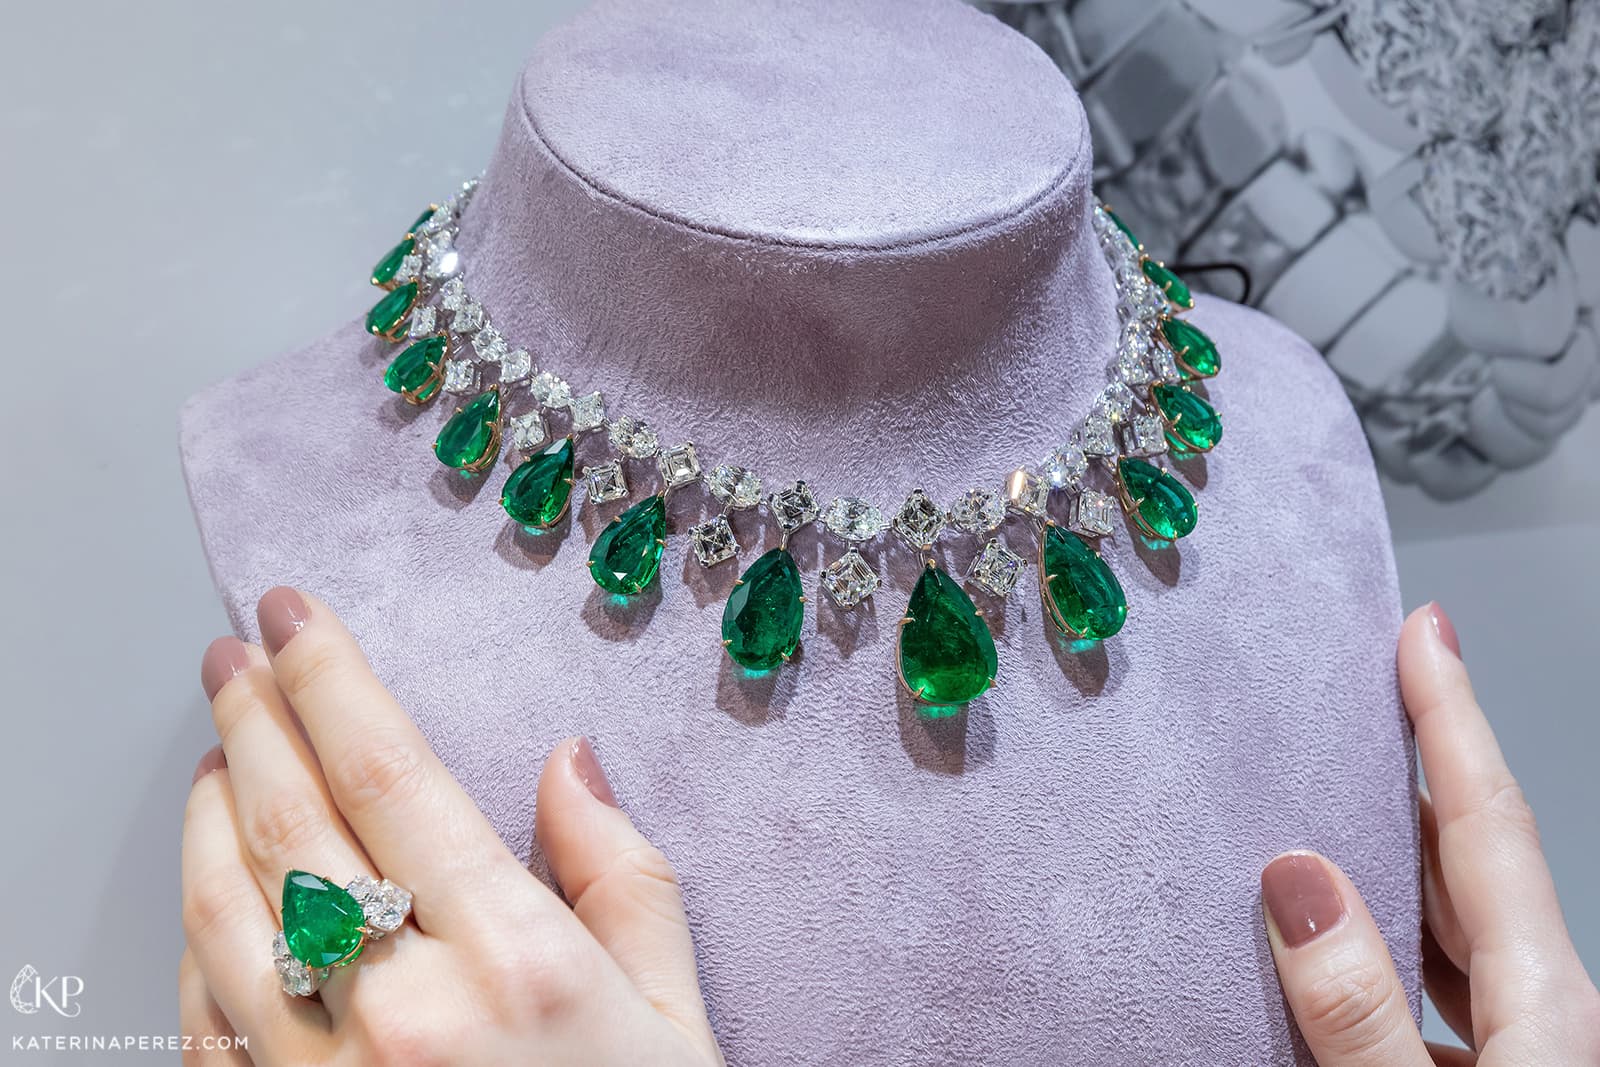 Luvor necklace with 125.70ct Colombian emeralds and diamonds in white gold, and emerald and diamond ring